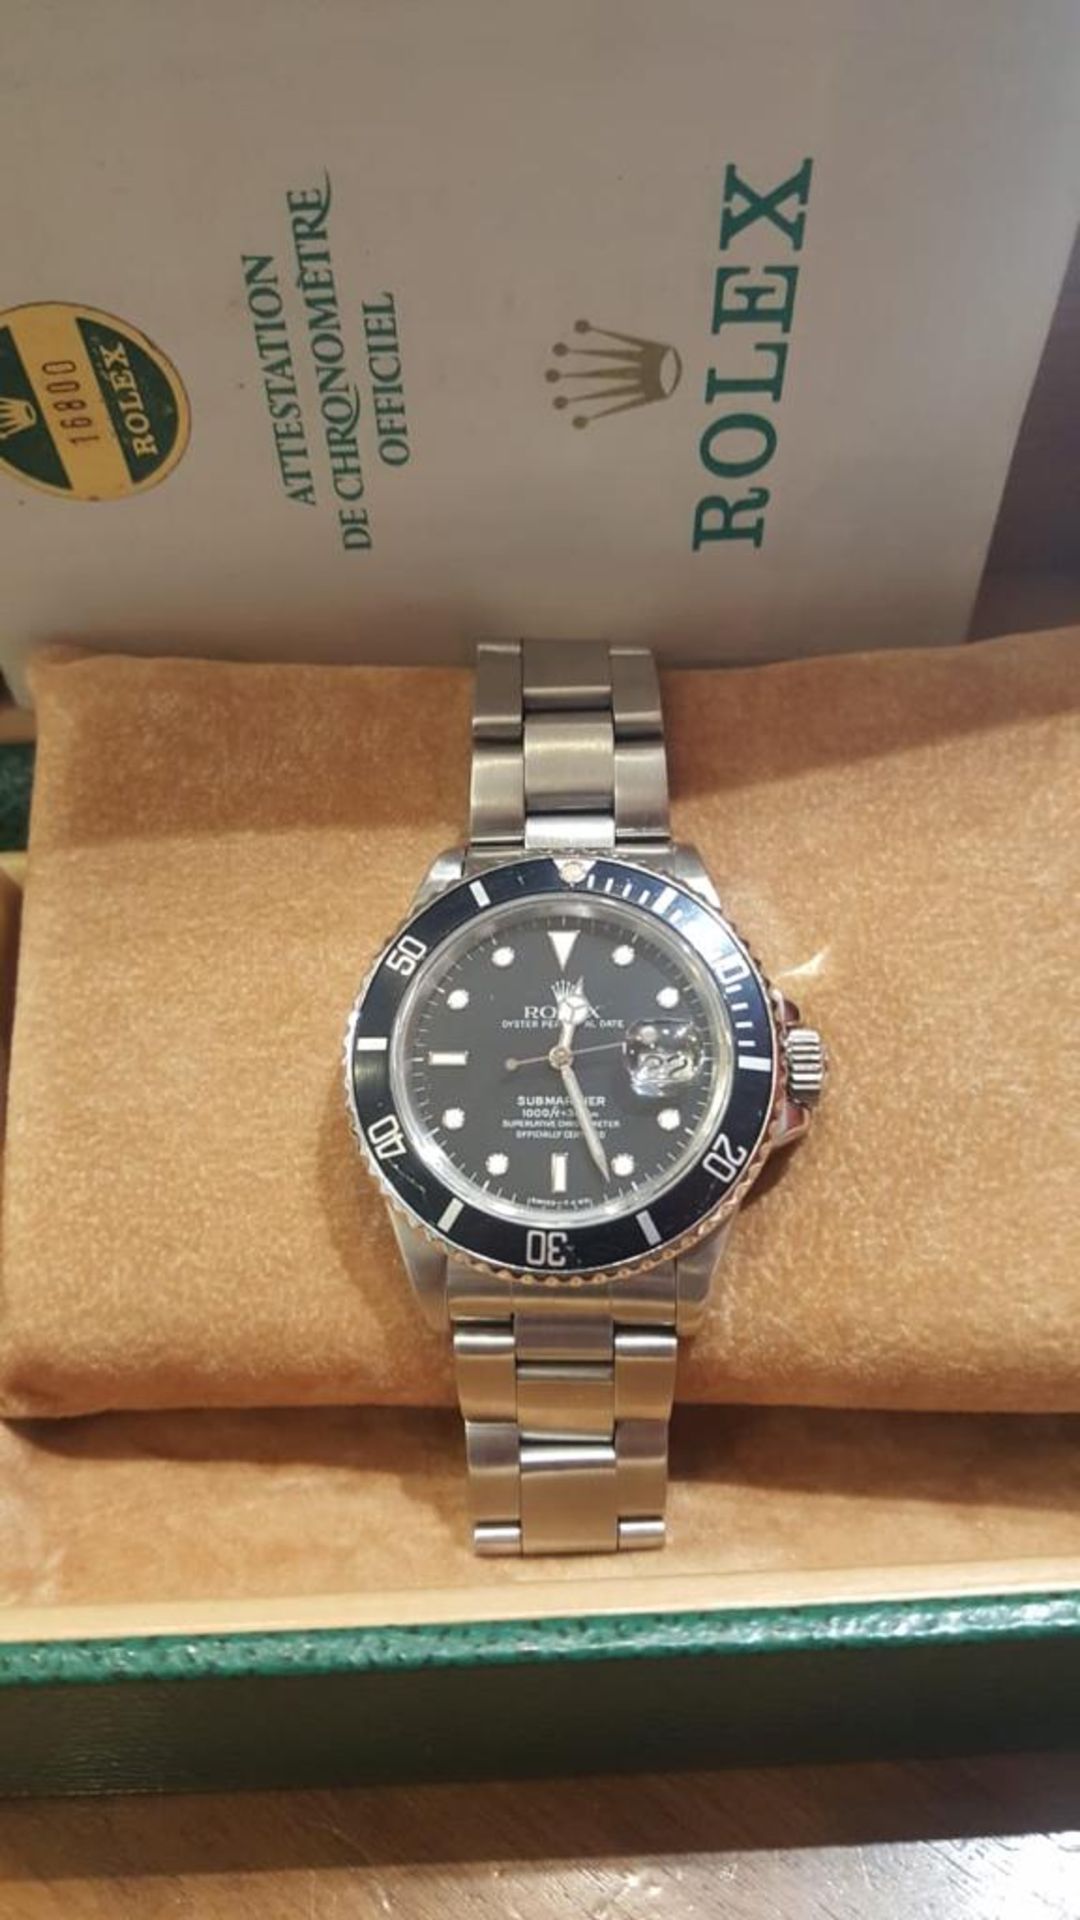 Brand: ROLEX Submariner Date model (watch) Reference number 16800 Automatic charge Material of the